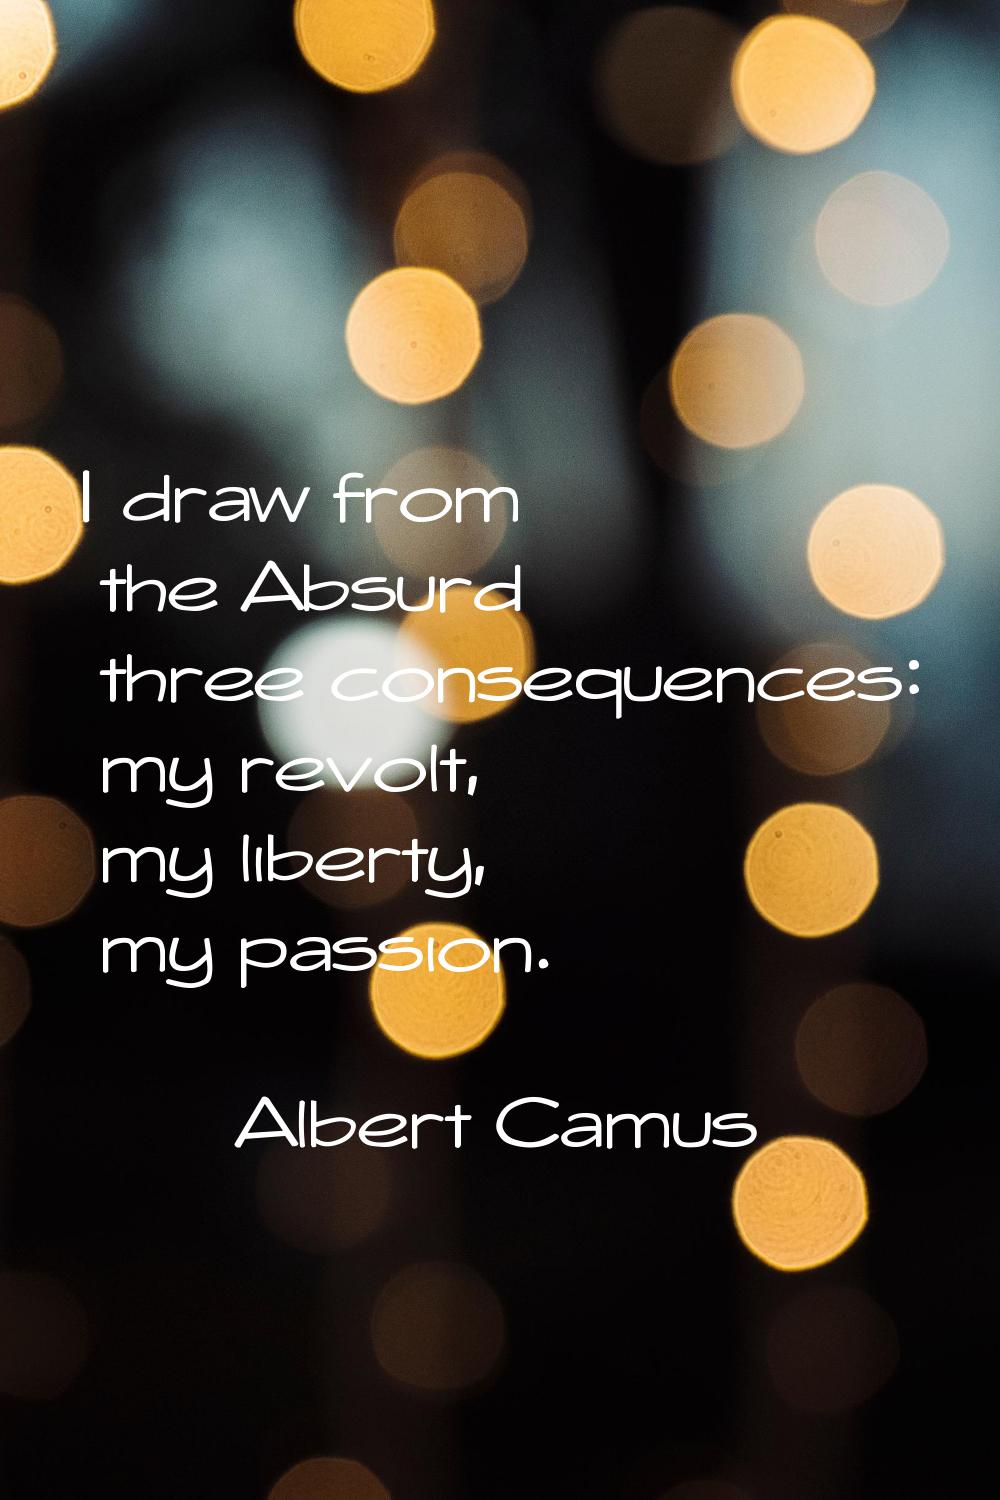 I draw from the Absurd three consequences: my revolt, my liberty, my passion.